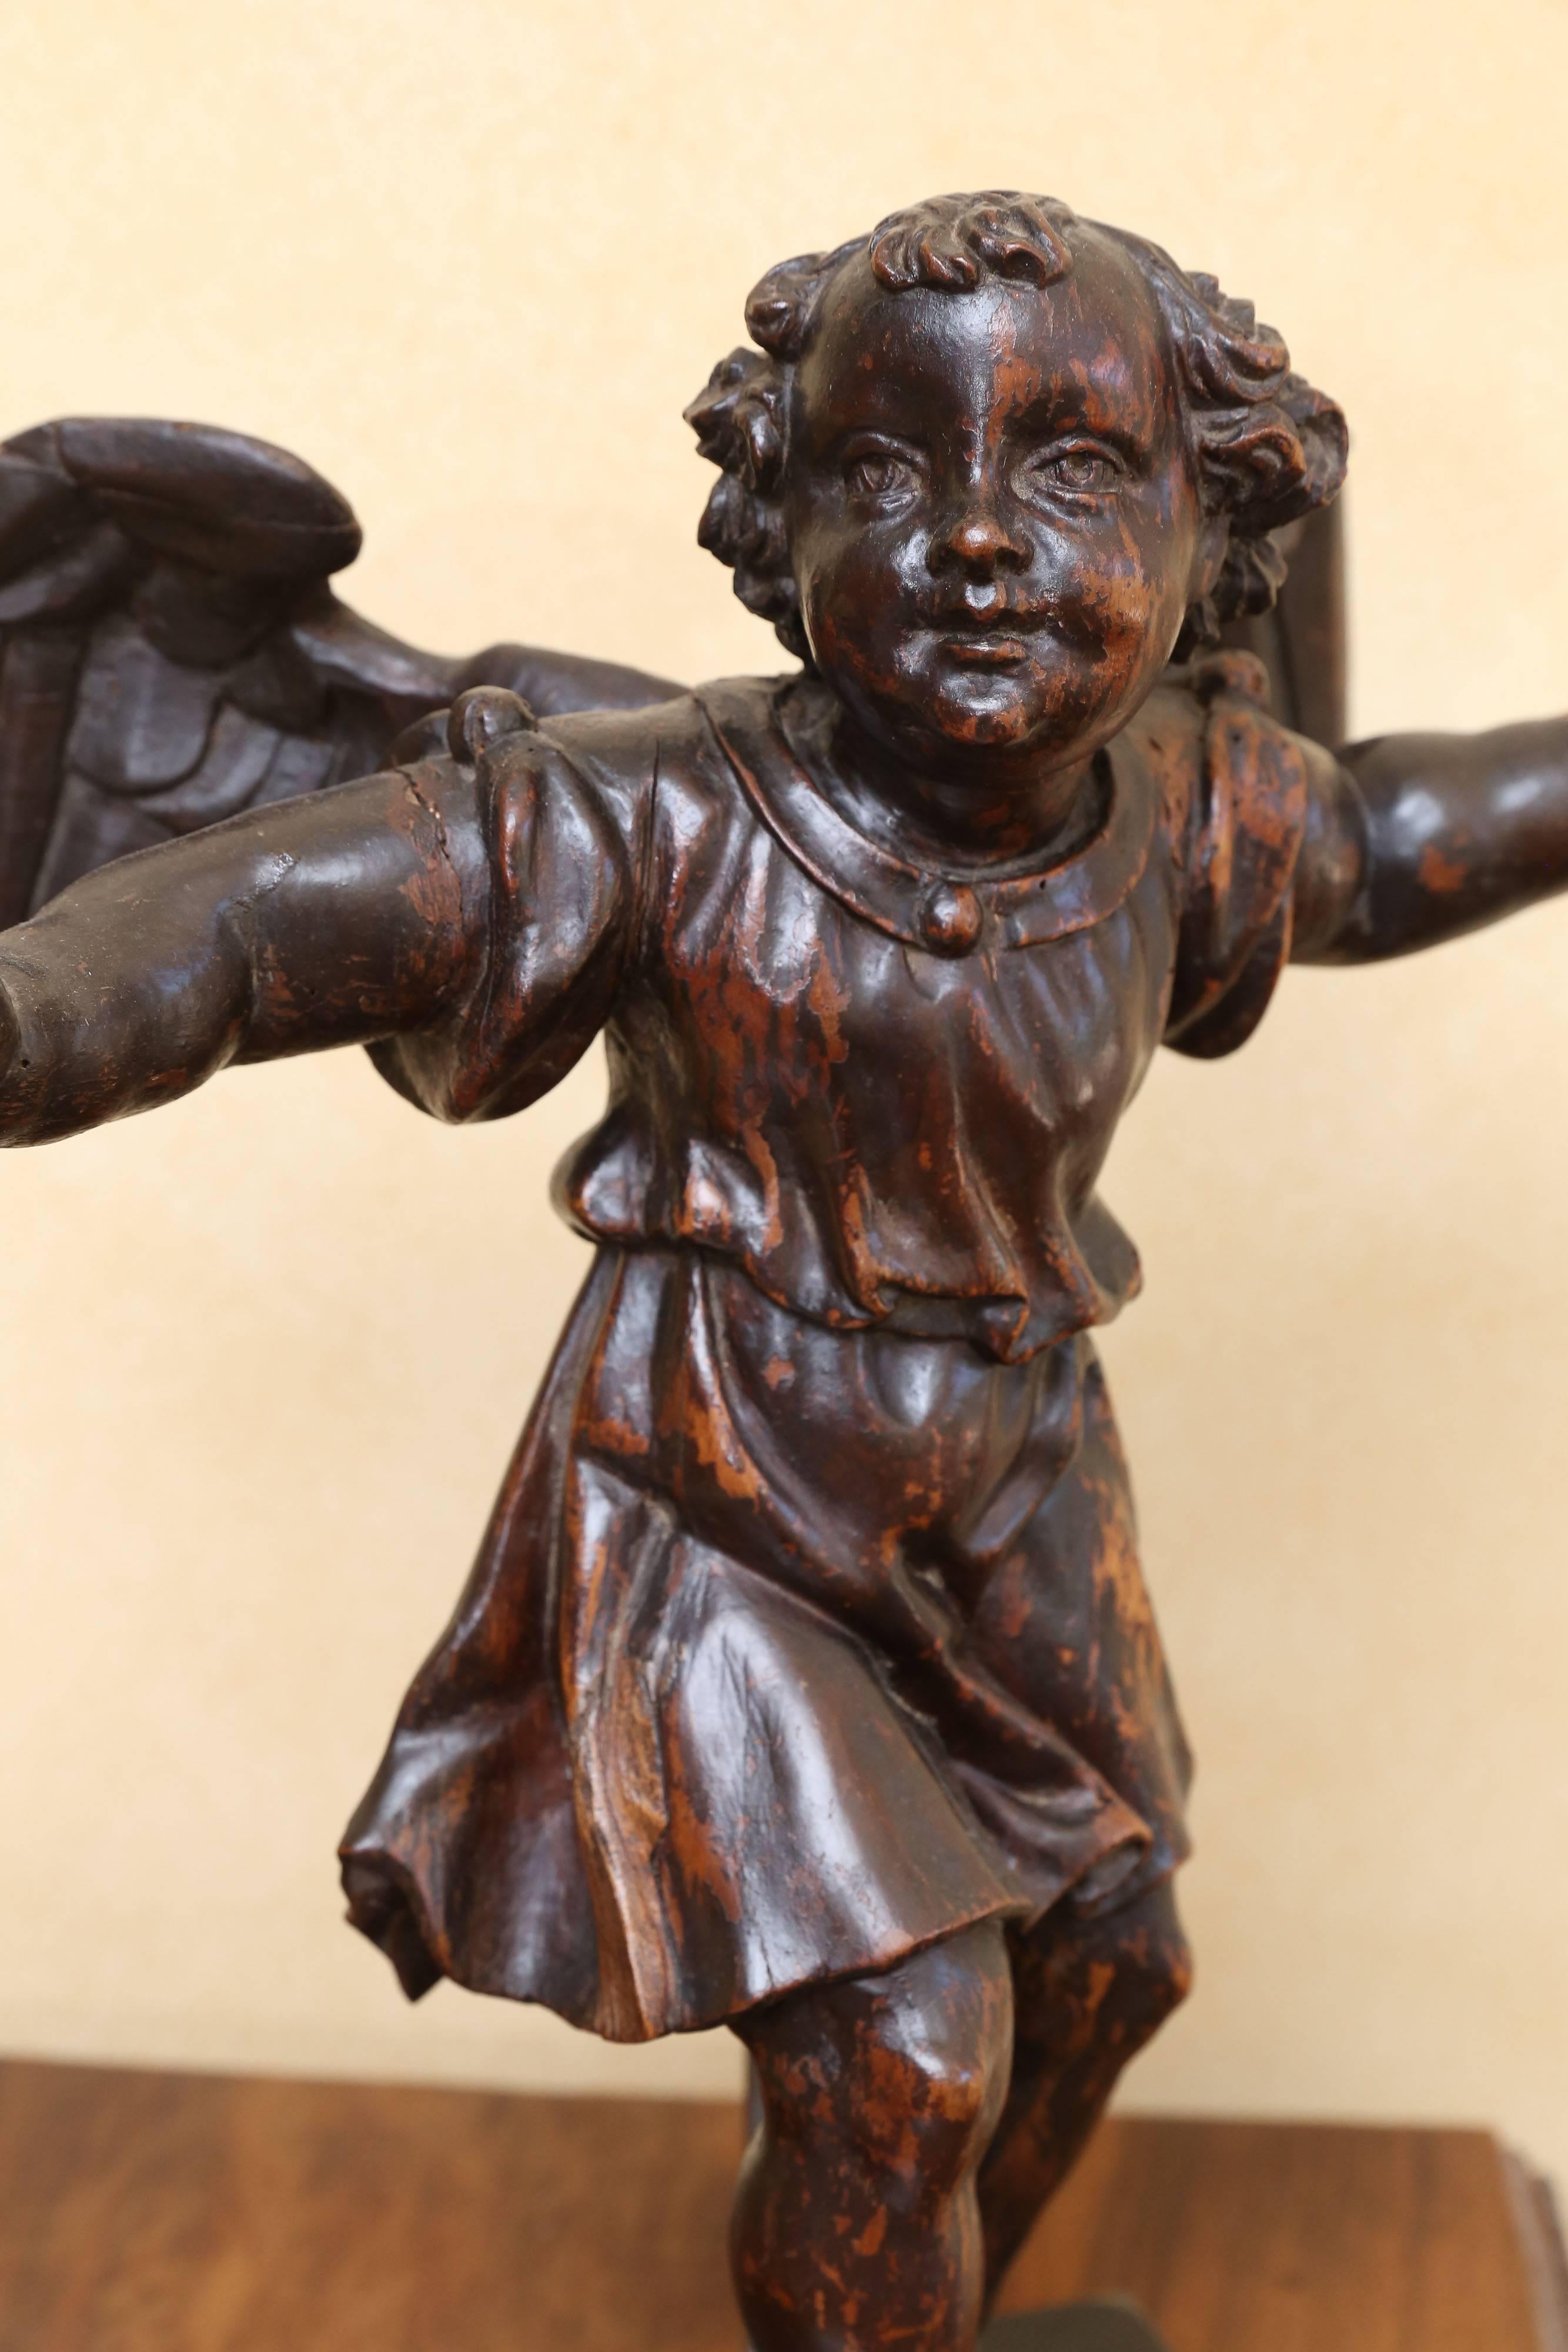 18th century carved angel found in Belgium. Custom stand so that it appears to be dancing.